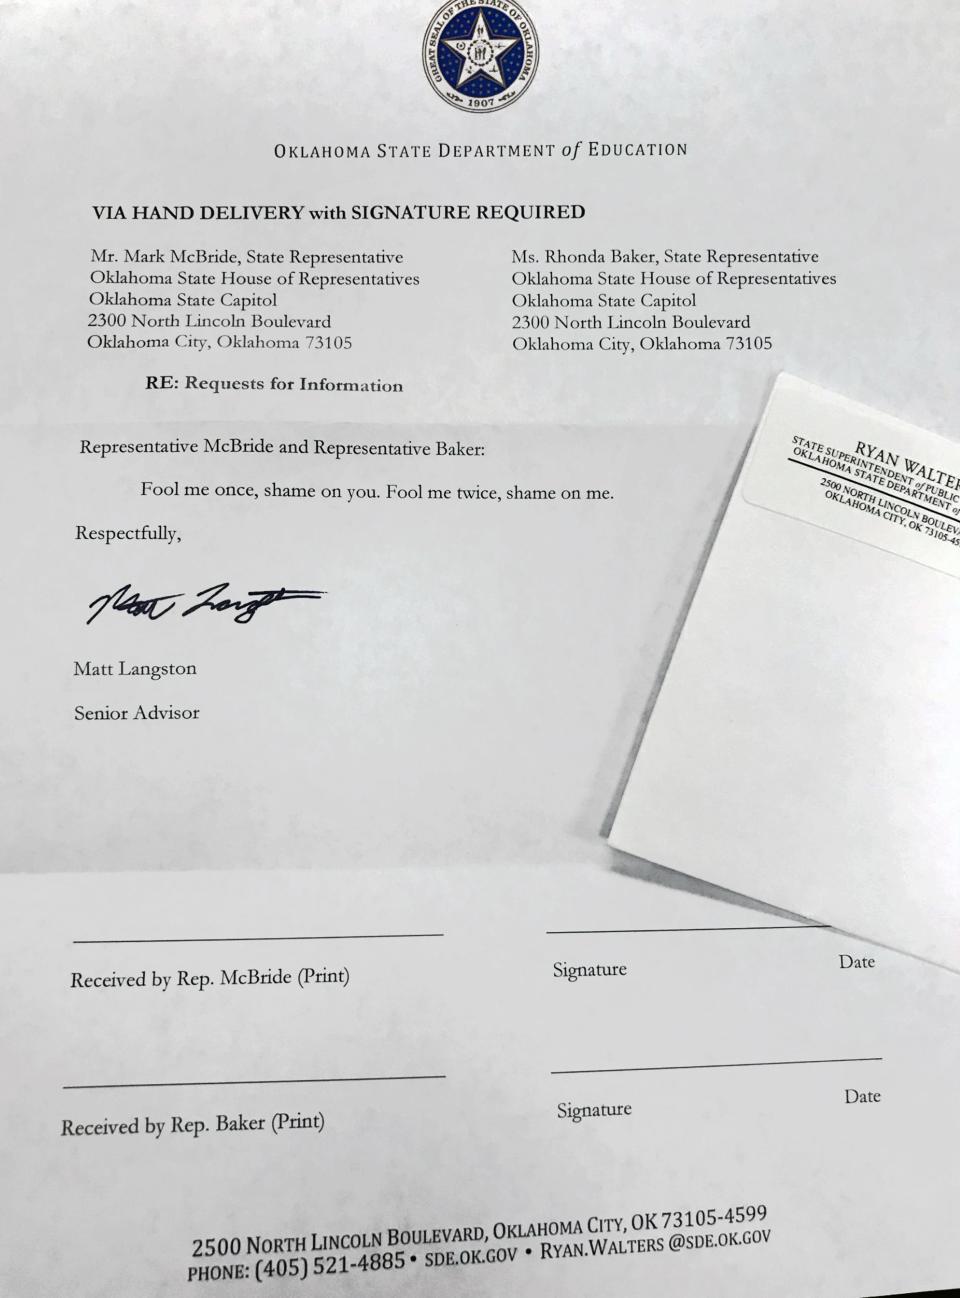 A photo of a letter received by state Rep. Mark McBride and Rep. Rhonda Baker from state schools Superintendent Ryan Walters' top adviser, Matt Langston.